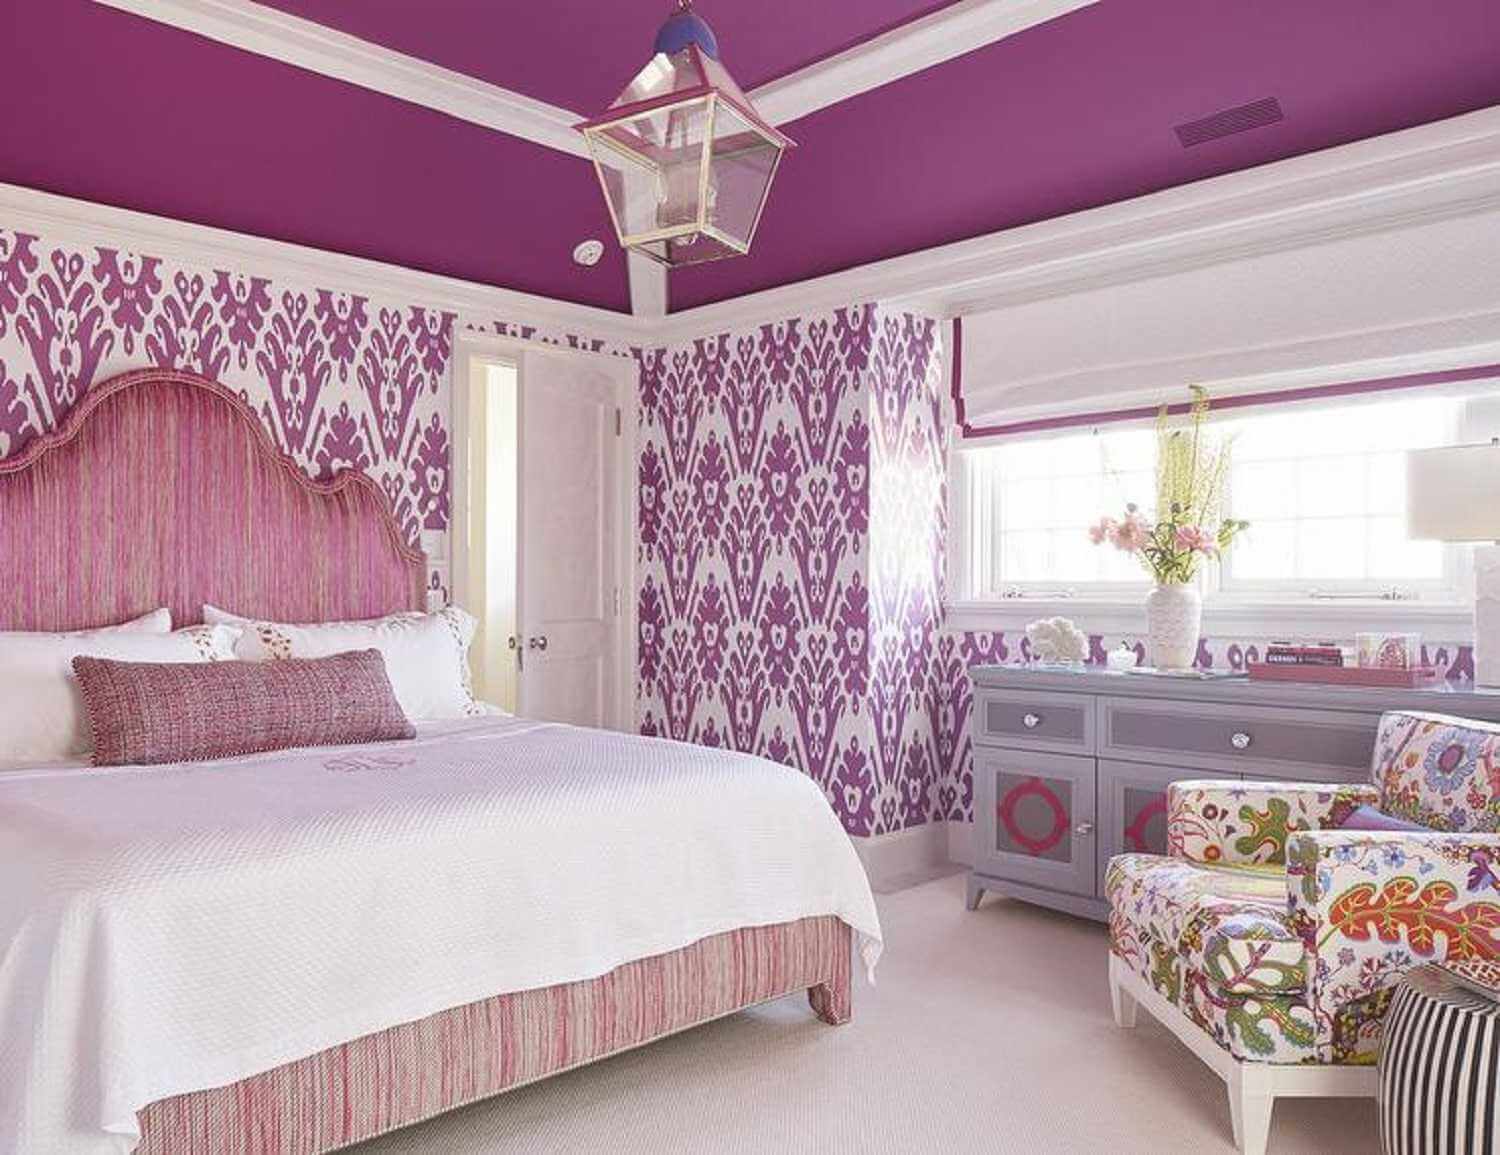 Purple Bedroom Tips and Decorating Ideas